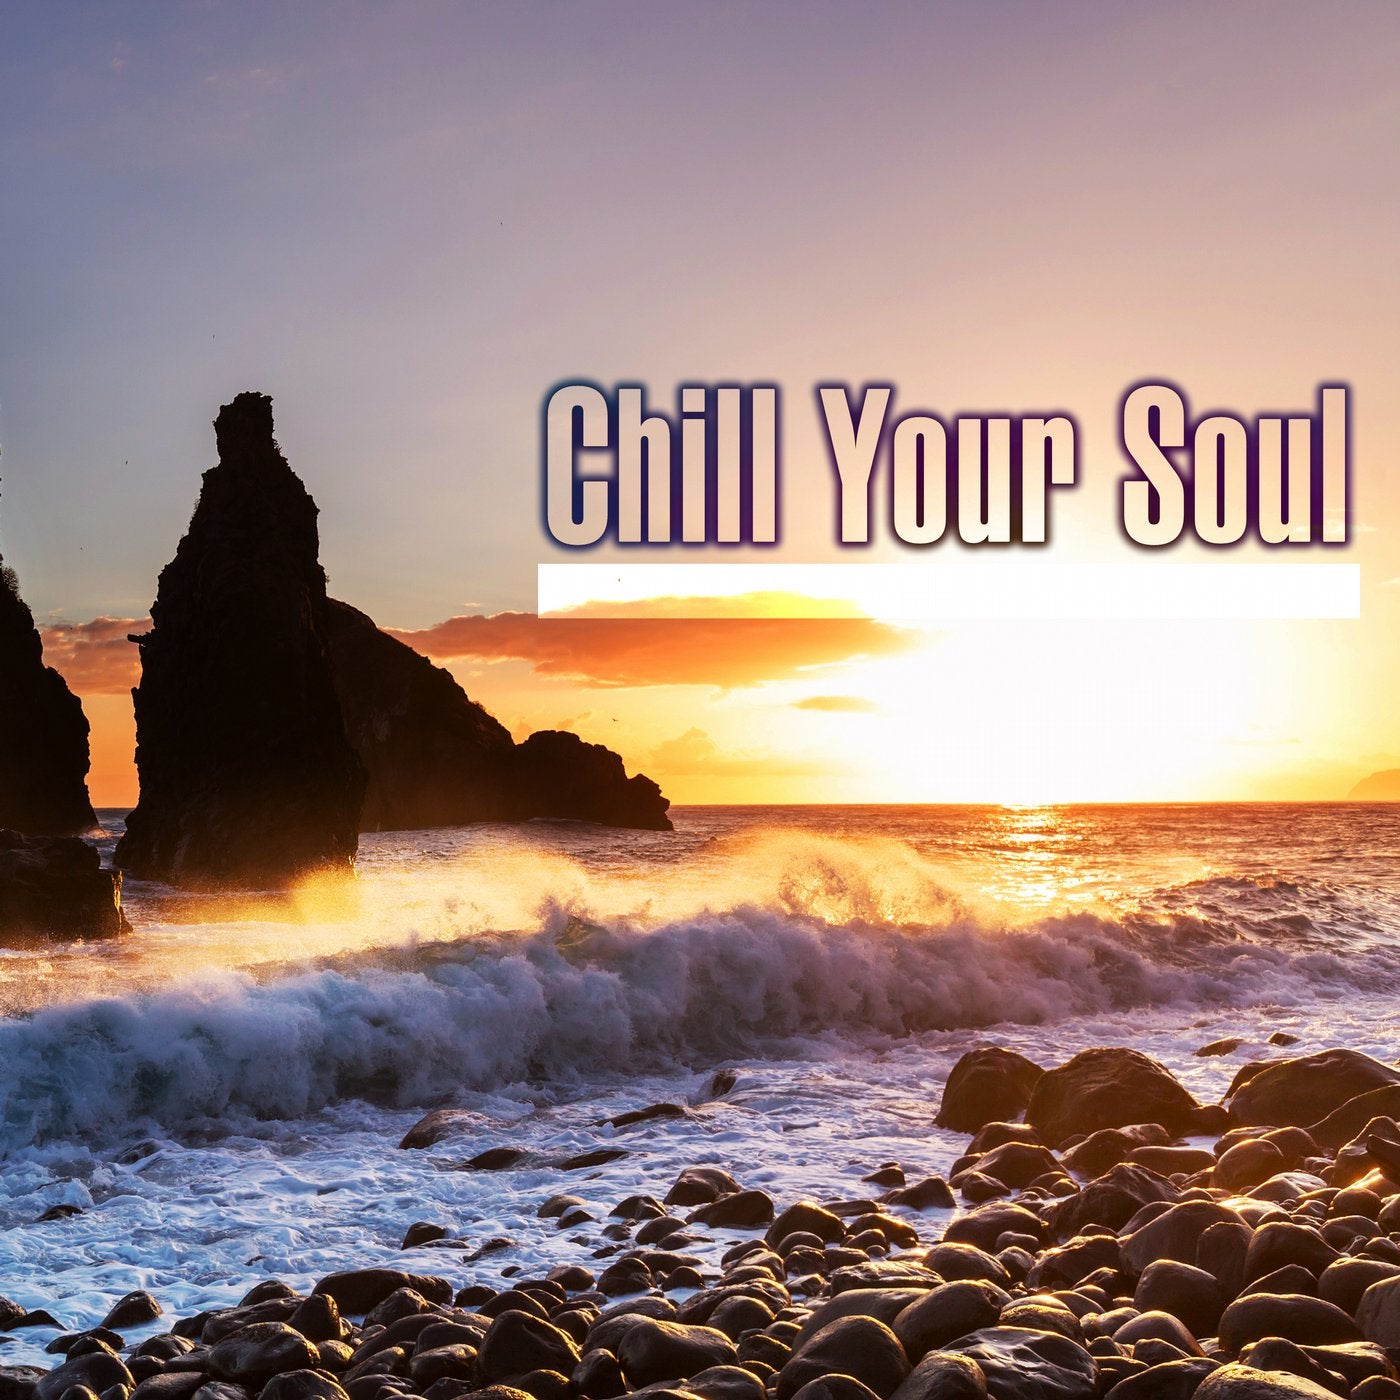 Chill Your Soul